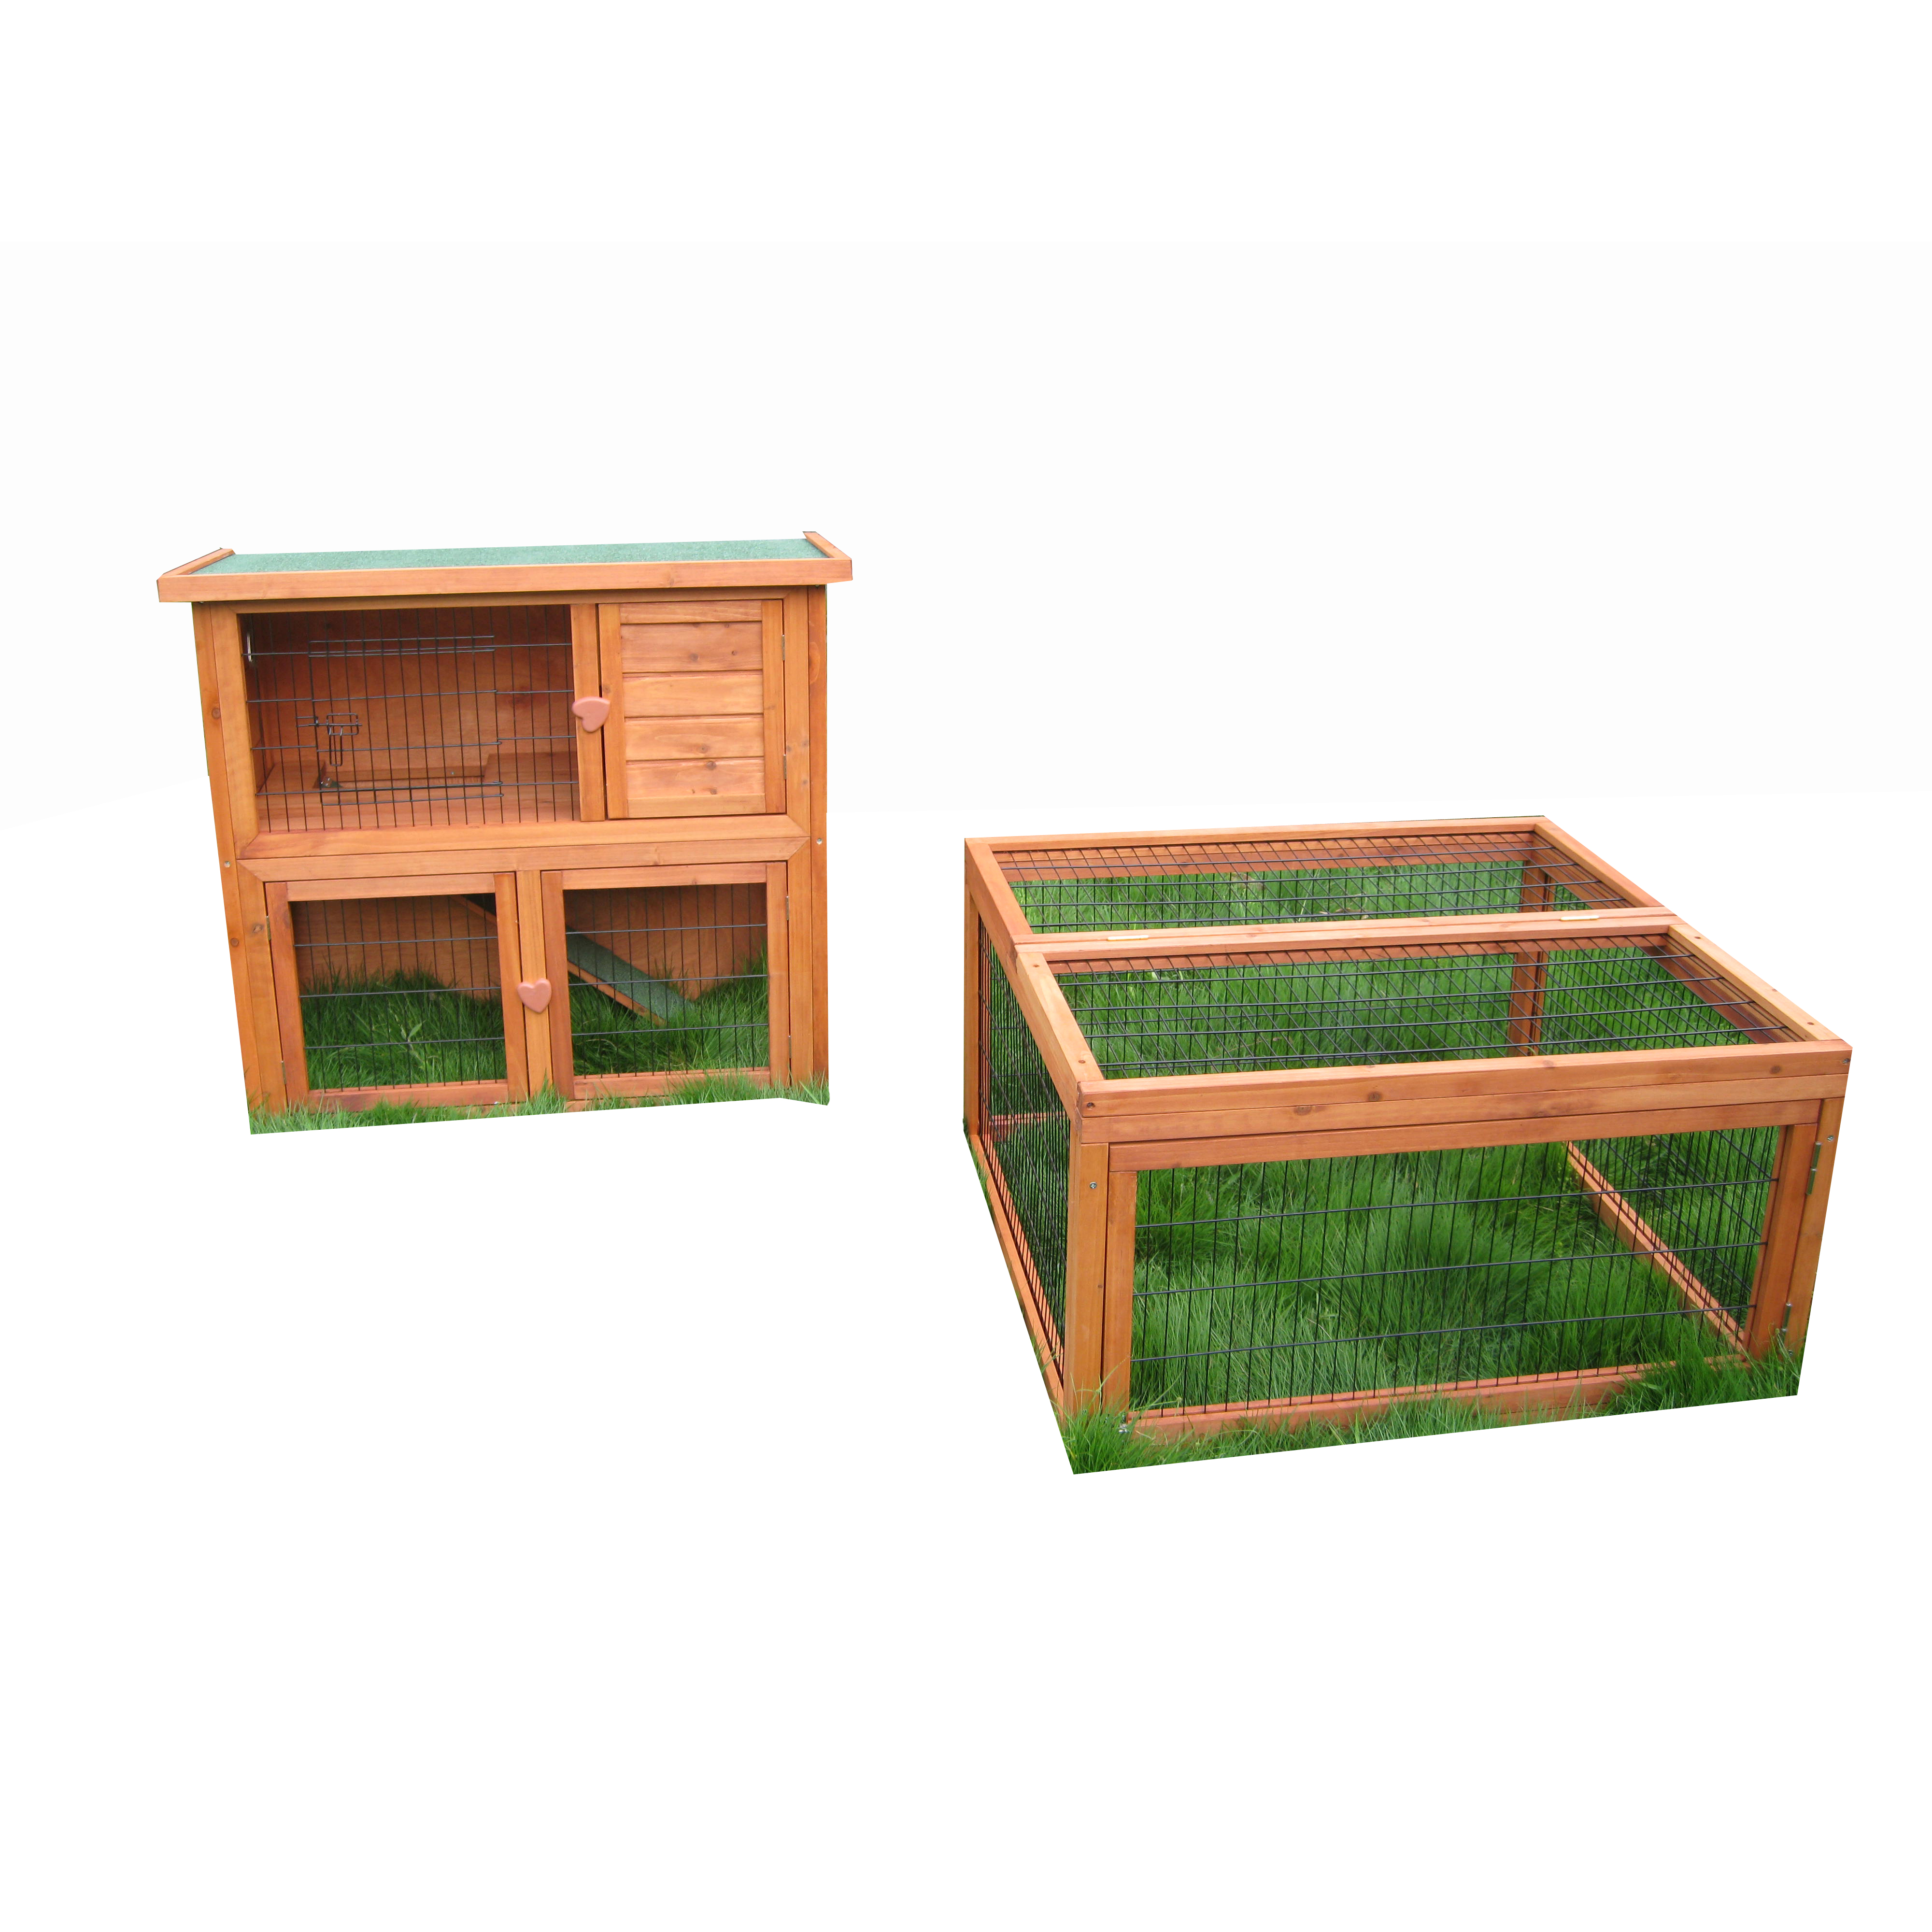 Wood Rabbit Hutch Backyard Cage Small Animal with Entrance Ramp Lockable Doors Cat Shelter Guinea Pig House for sale